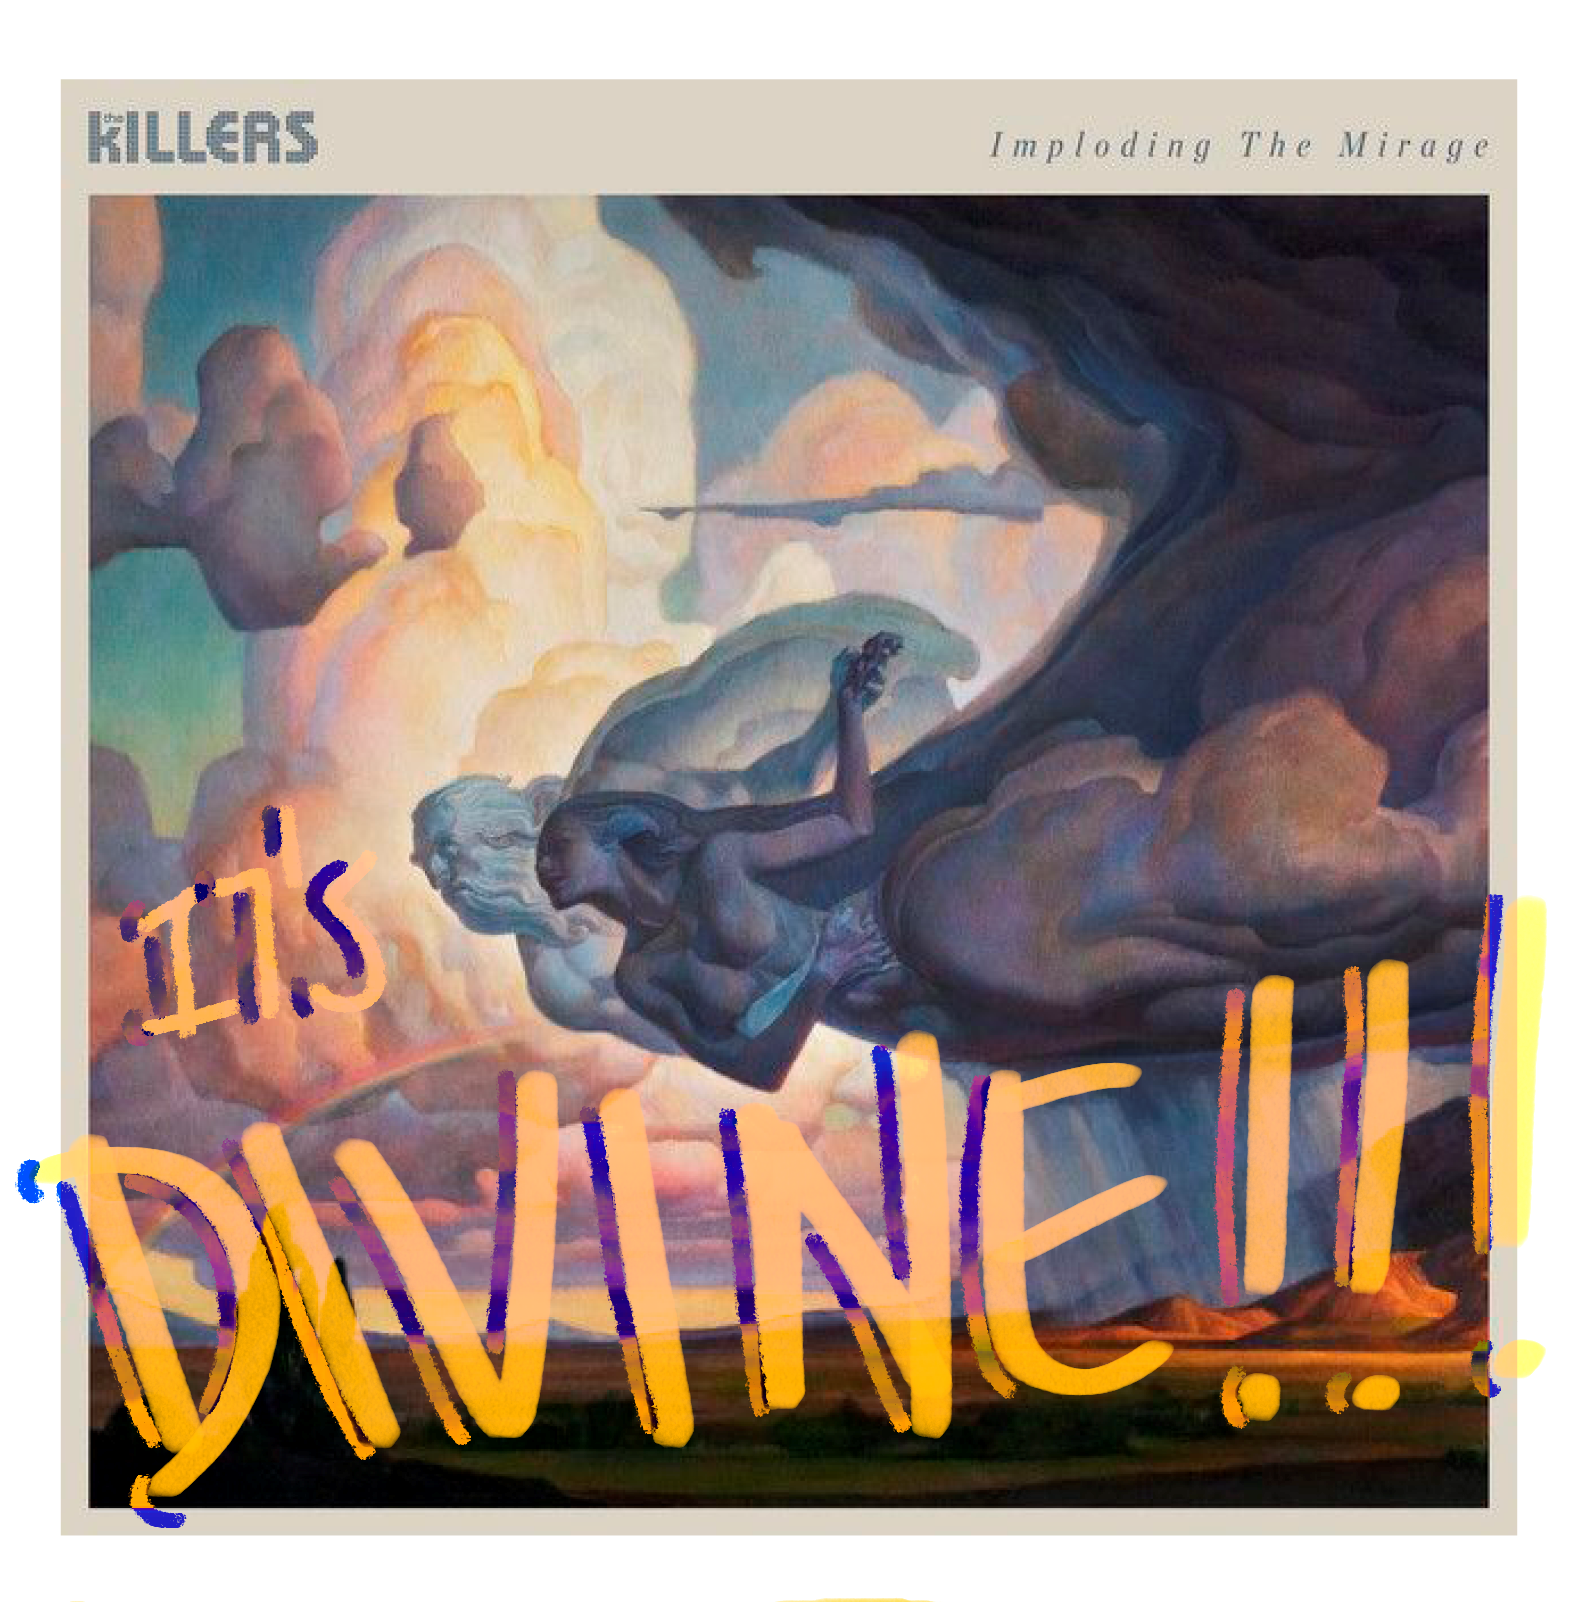 VVIBING: VVIBE CHECKING: Imploding the Mirage by The Killers